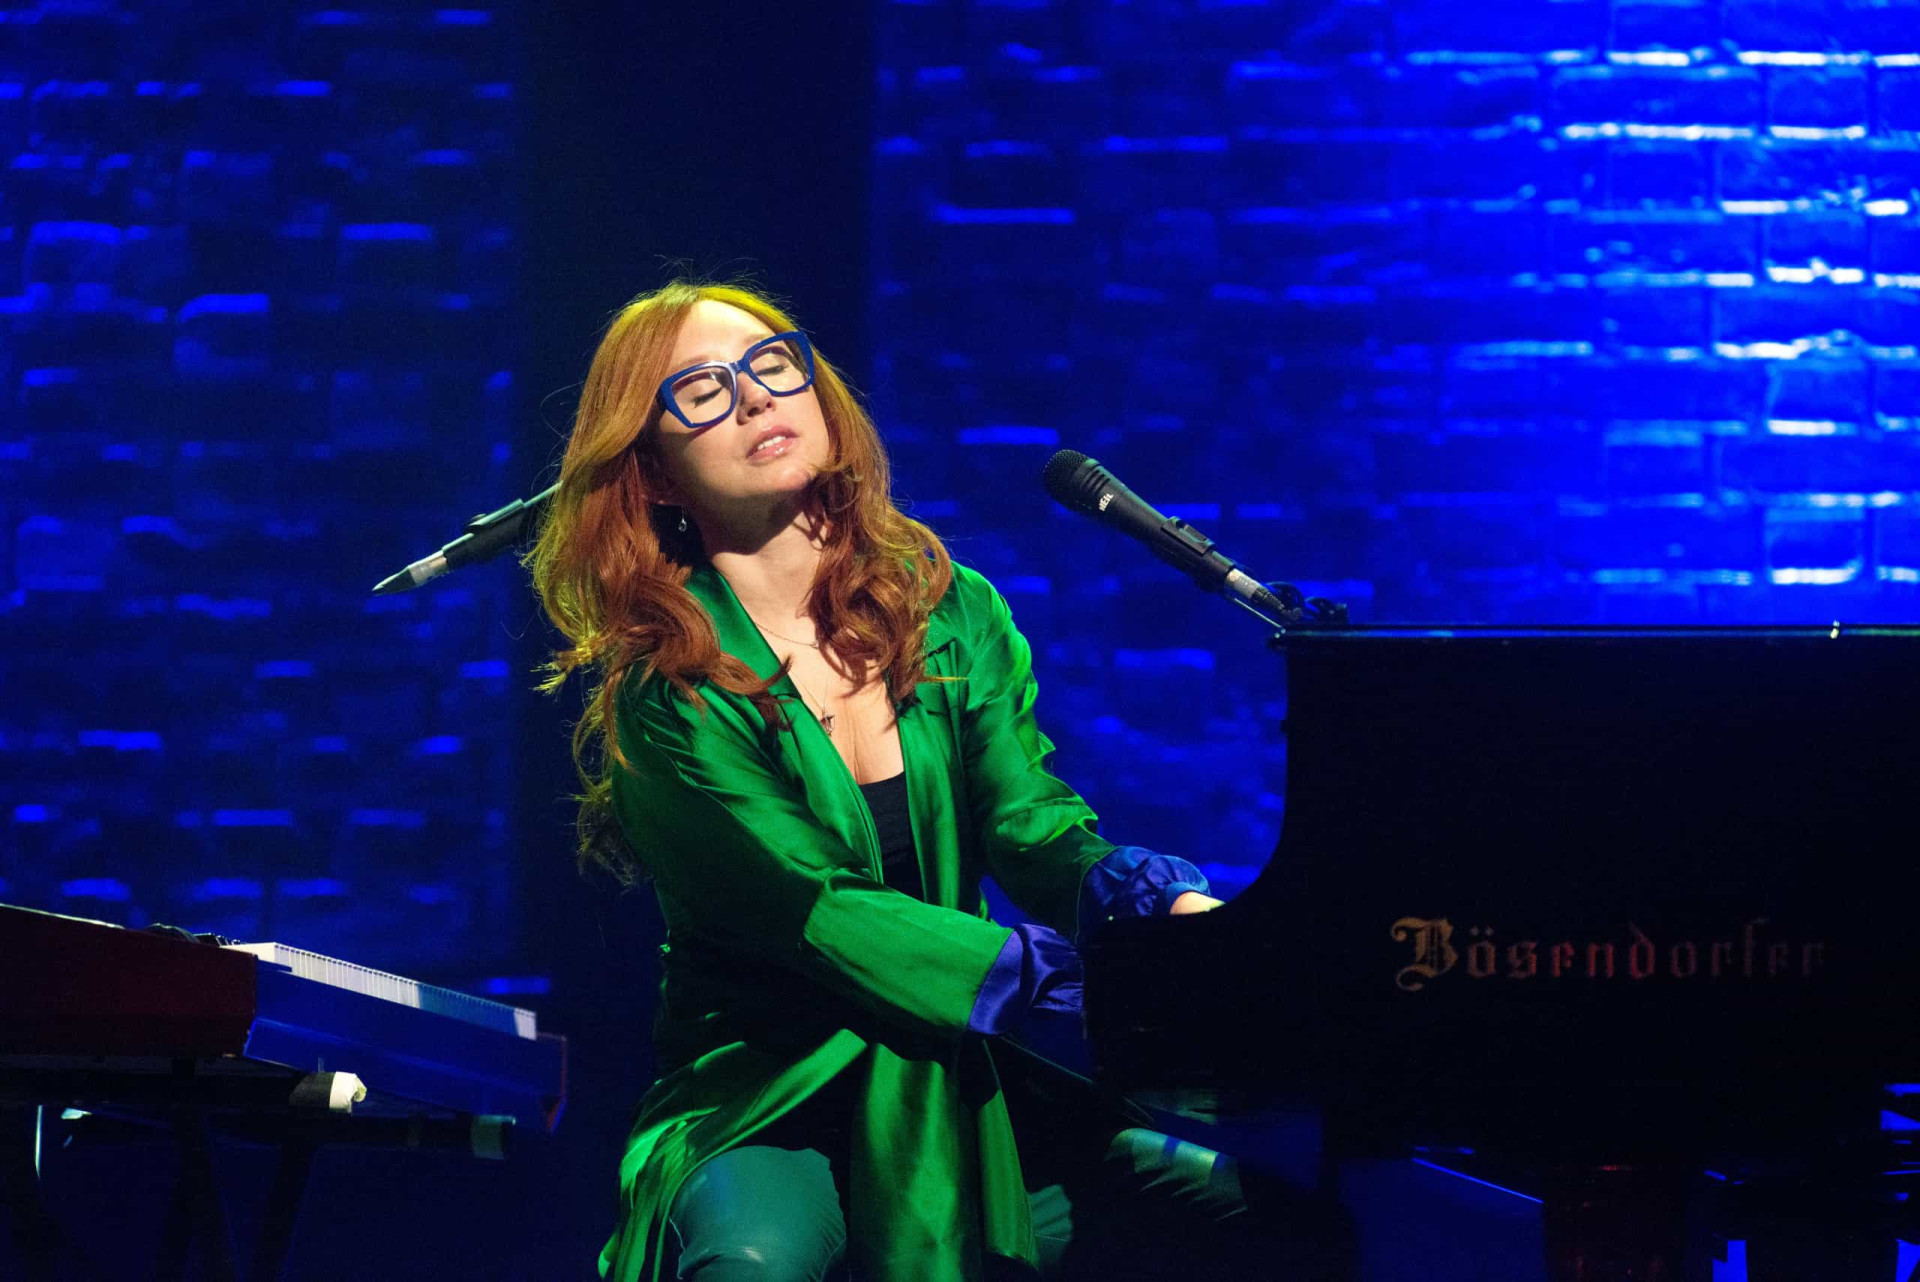 <p>A piano ballad featured on her 2014 album 'Unrepentant Geraldines,' 'Oysters' alludes to Amos coming to terms with haunting memories and self-doubt.</p><p><a href="https://www.msn.com/en-my/community/channel/vid-7xx8mnucu55yw63we9va2gwr7uihbxwc68fxqp25x6tg4ftibpra?cvid=94631541bc0f4f89bfd59158d696ad7e">Follow us and access great exclusive content every day</a></p>